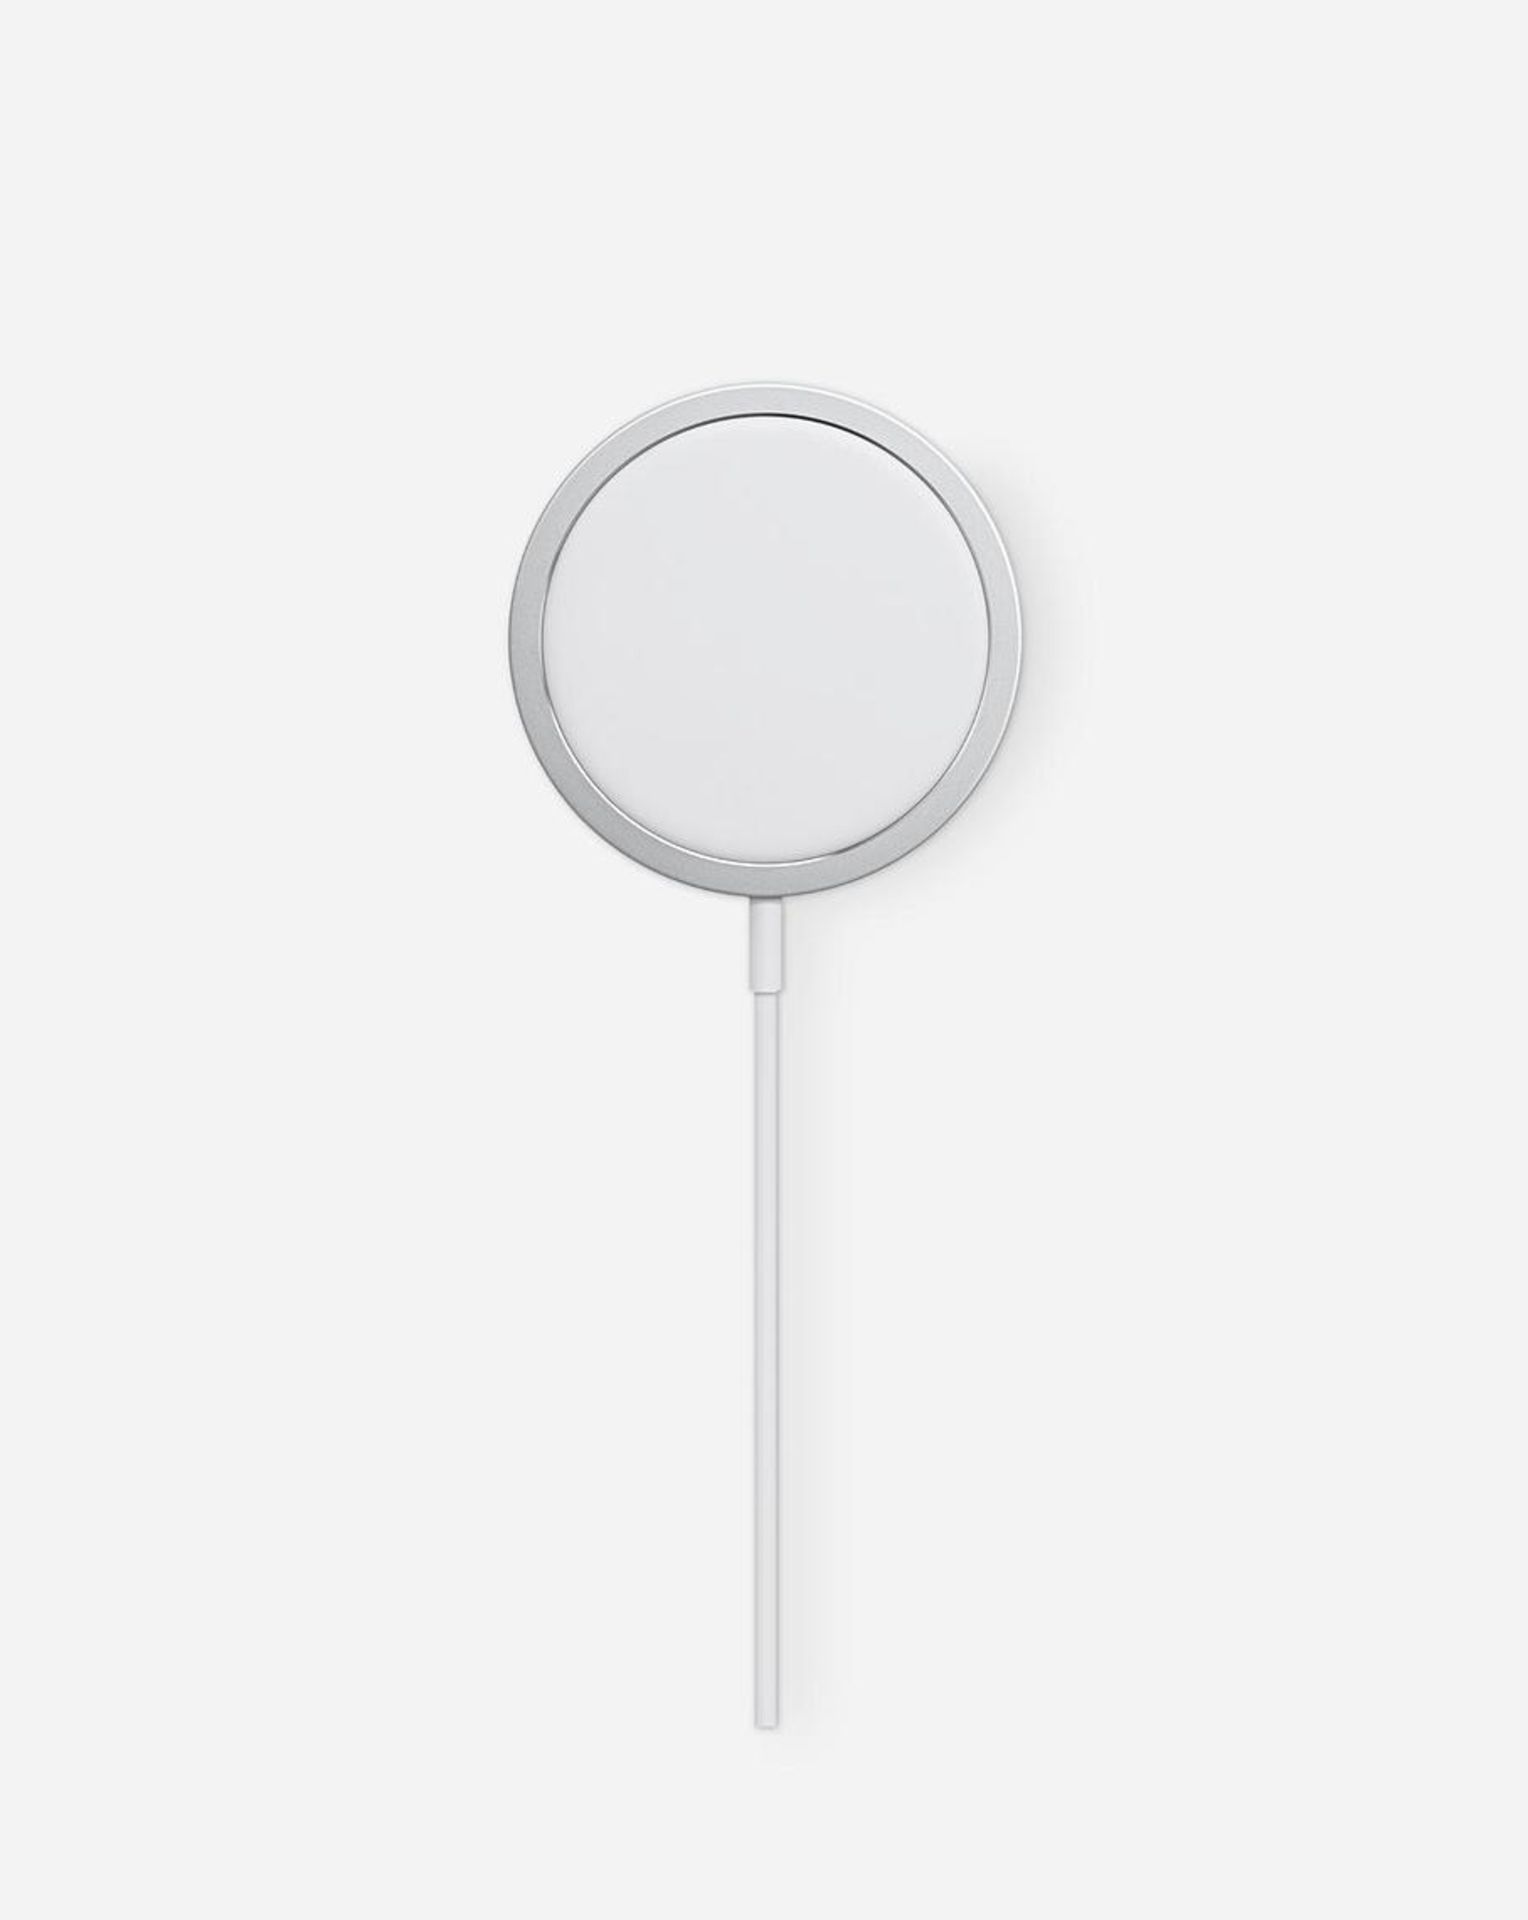 Apple MagSafe Charger. - SR4. The MagSafe Charger makes wireless charging a cinch. The perfectly